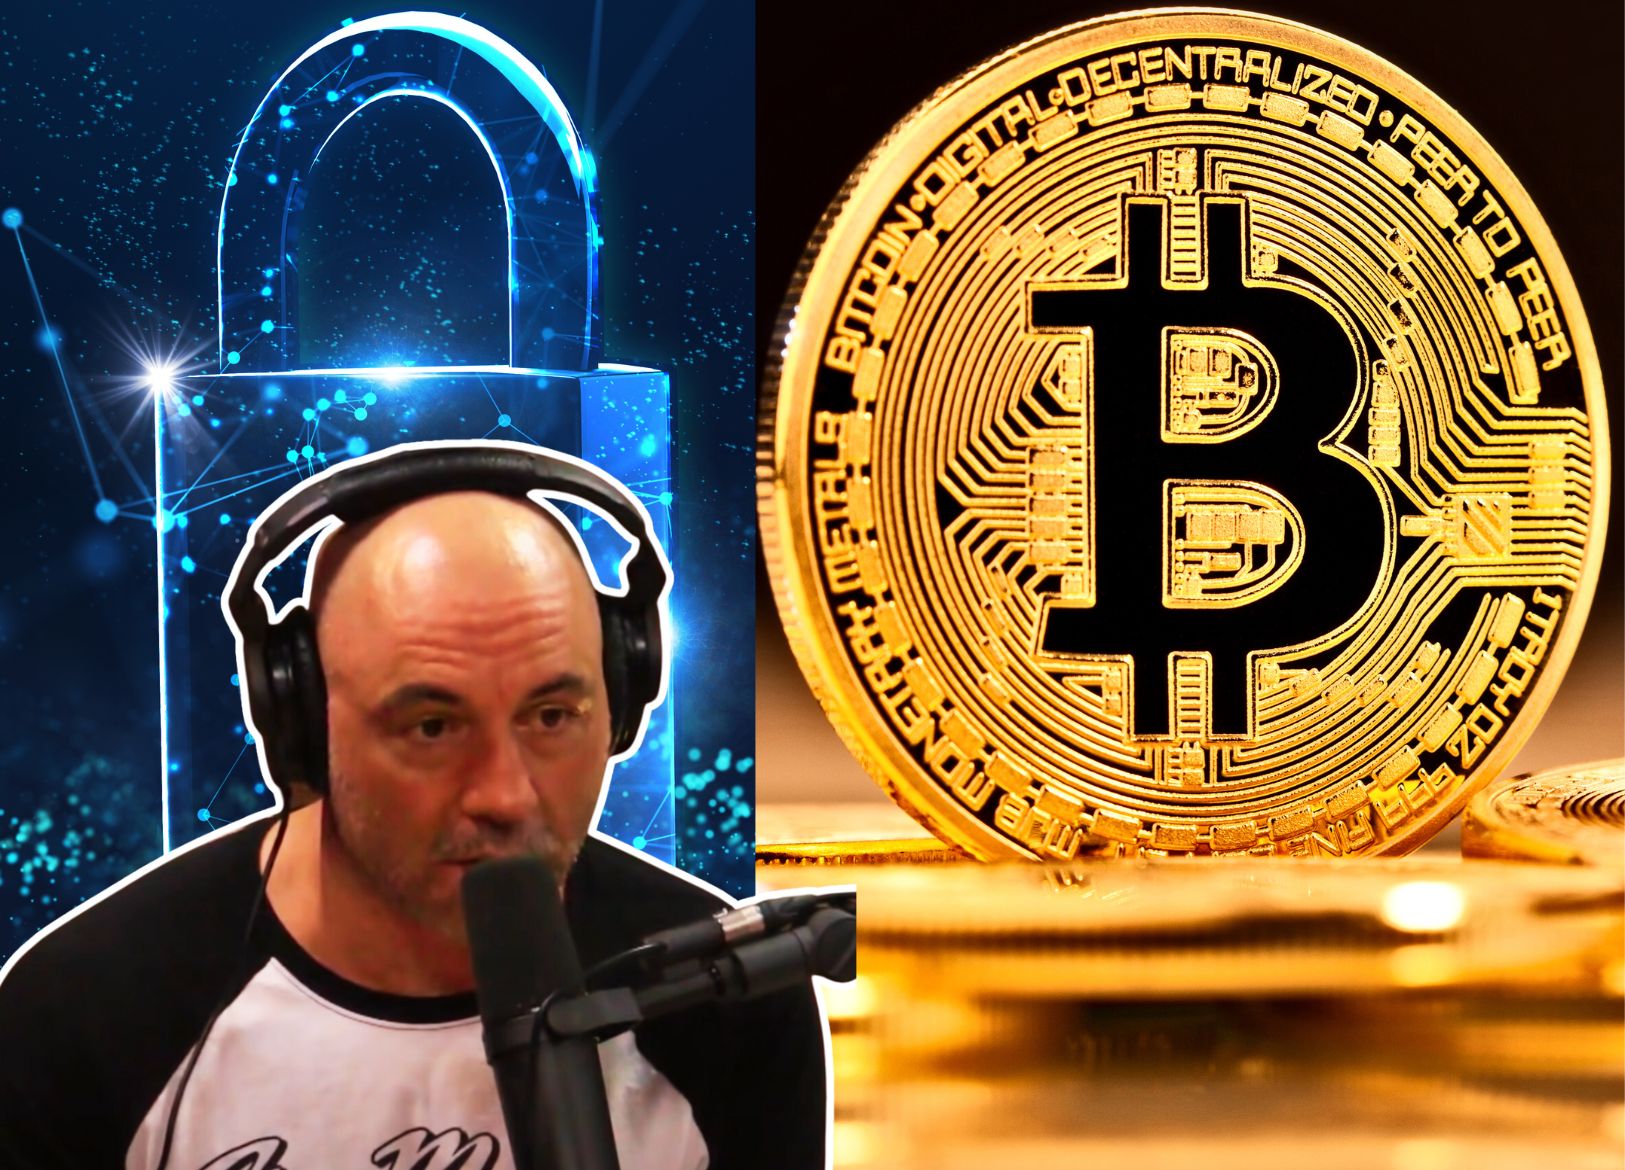 Joe Rogan talking while looking at a Bitcoin, with a cyber lock in the background.